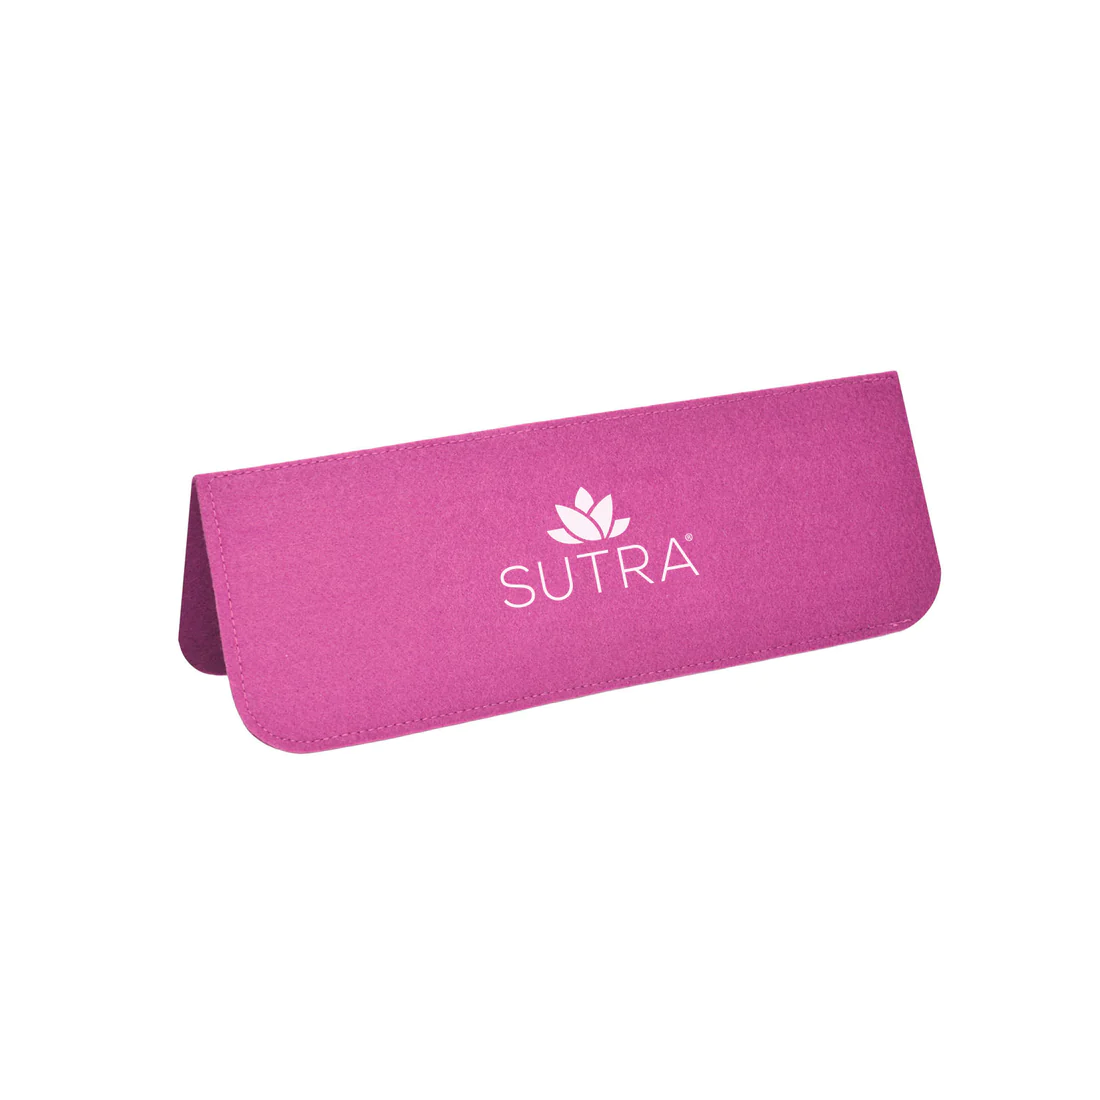 Sutra Beauty SUTRA Heat Case for Flat Irons,Foldable Traveling Case, Heat Resistant, Pink